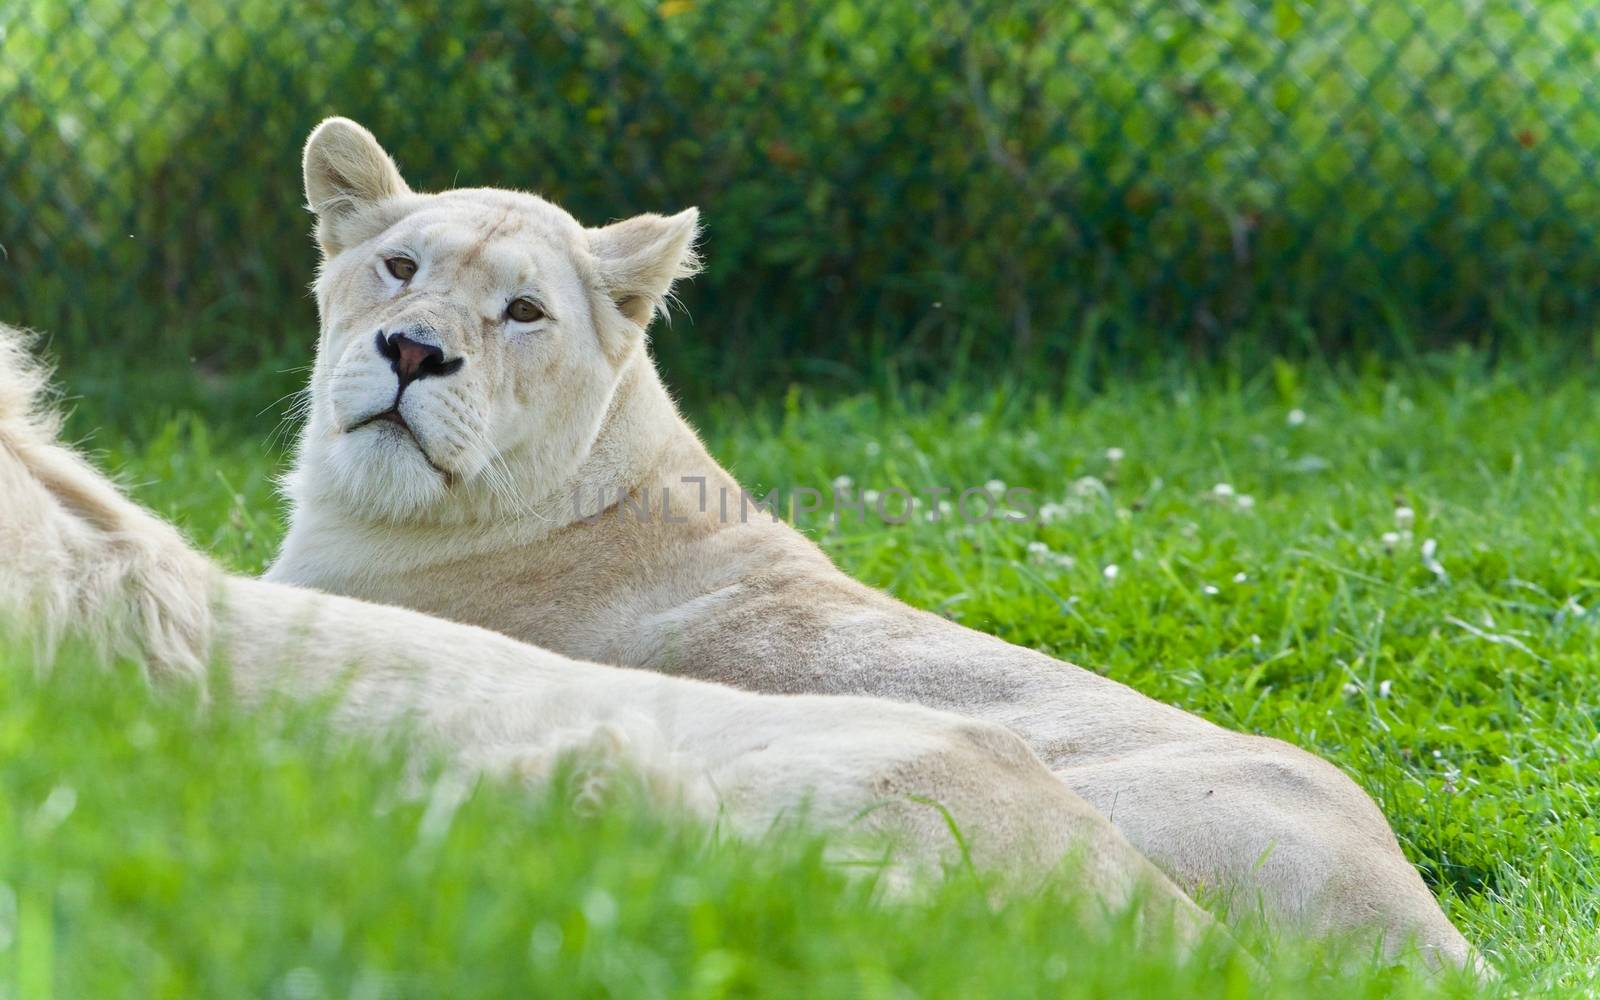 Photo of a pair of white lions laying together